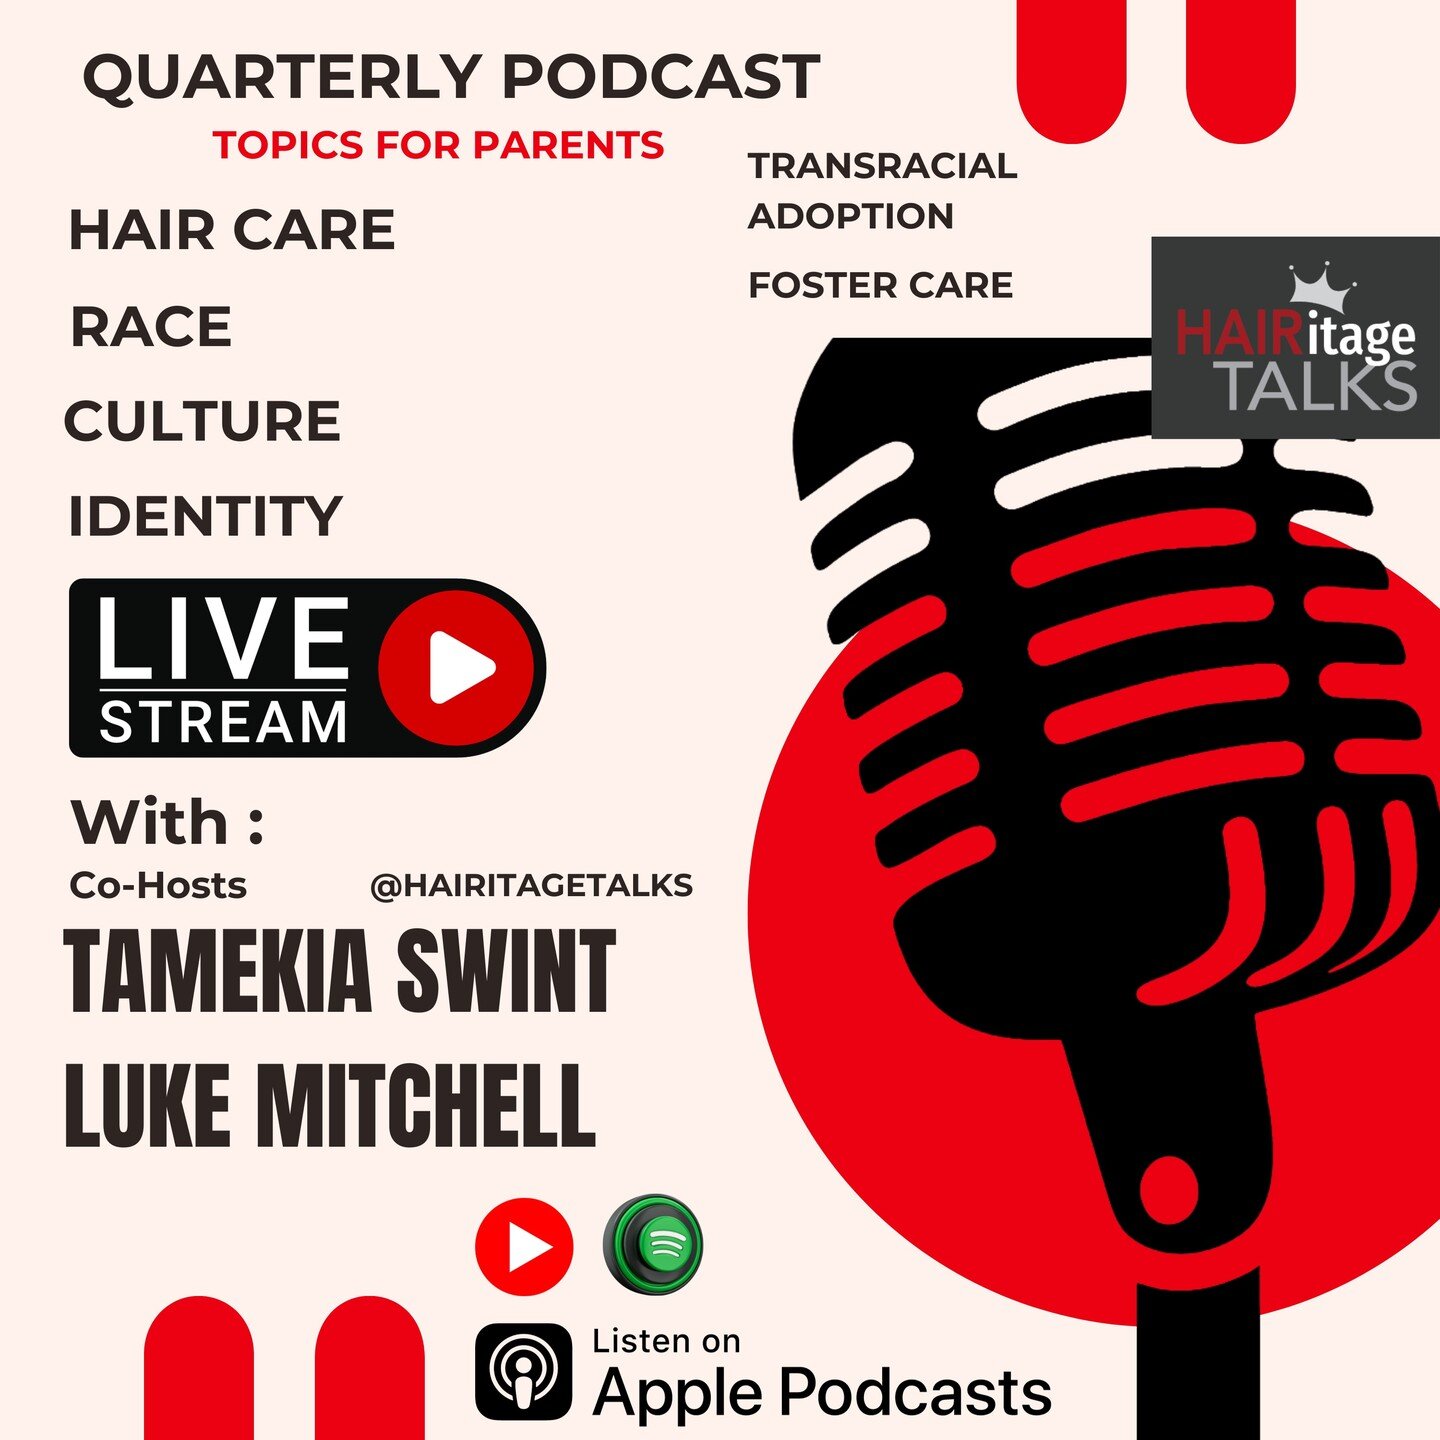 Yesterday we recorded episode #3 of #hairitagetalks where two transracial adoptees shared their stories for National Adoption Month! The new episode will drop in a few weeks and you don't want to miss it! #staytuned #transracialadoption #podcast #awa